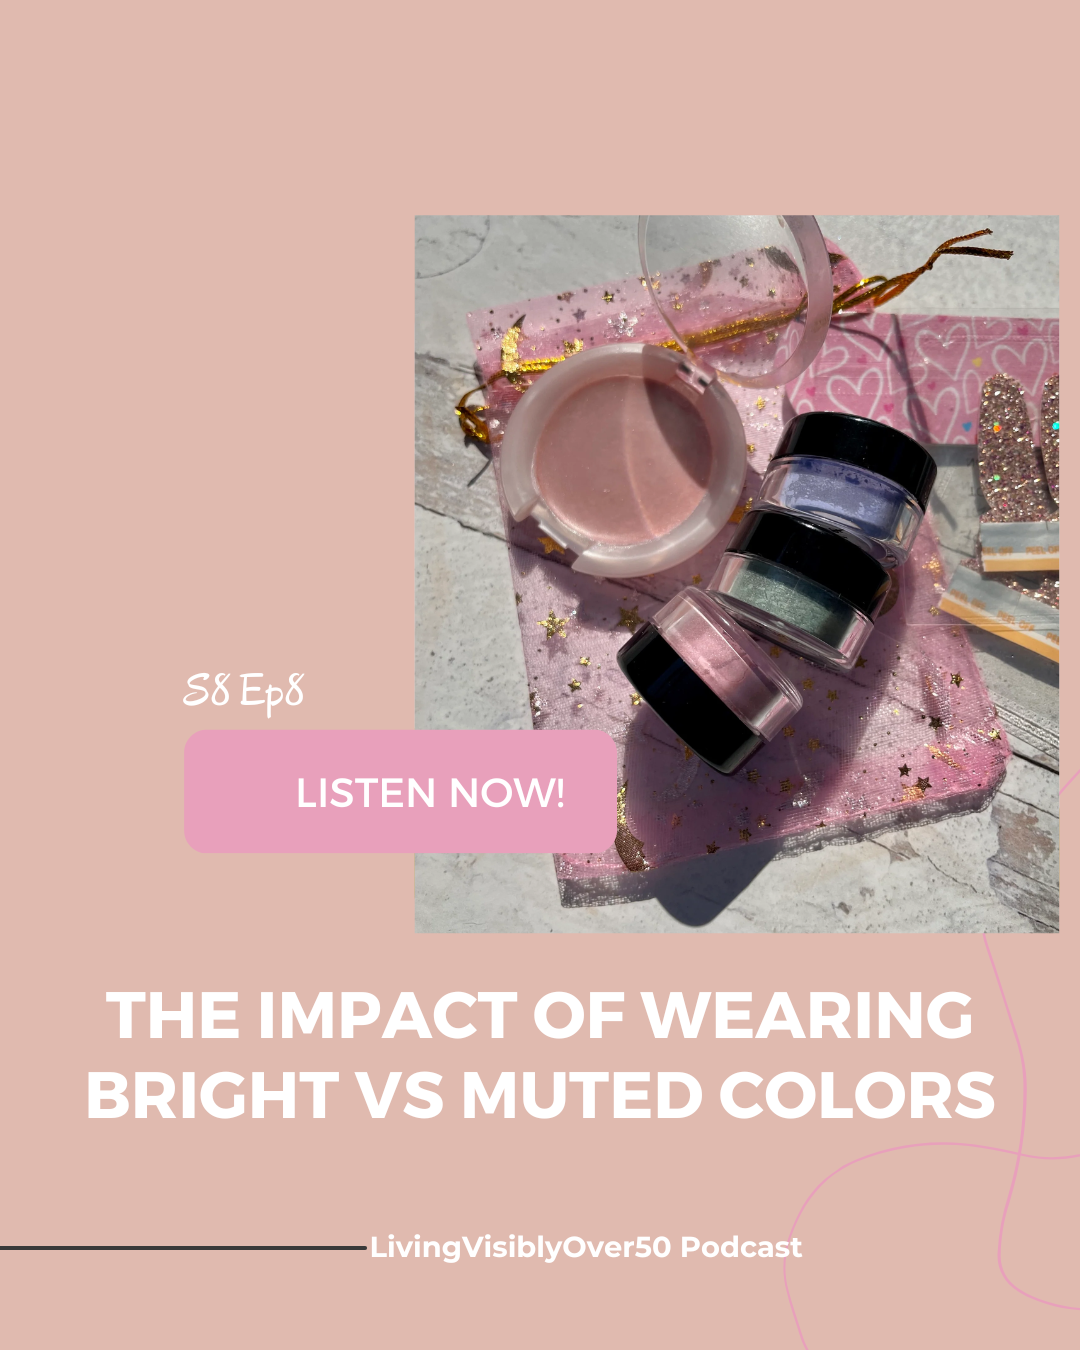 Living Visibly Over 50 podcast.  S8 Ep8 The Impact of Wearing Bright vs Muted Colors.